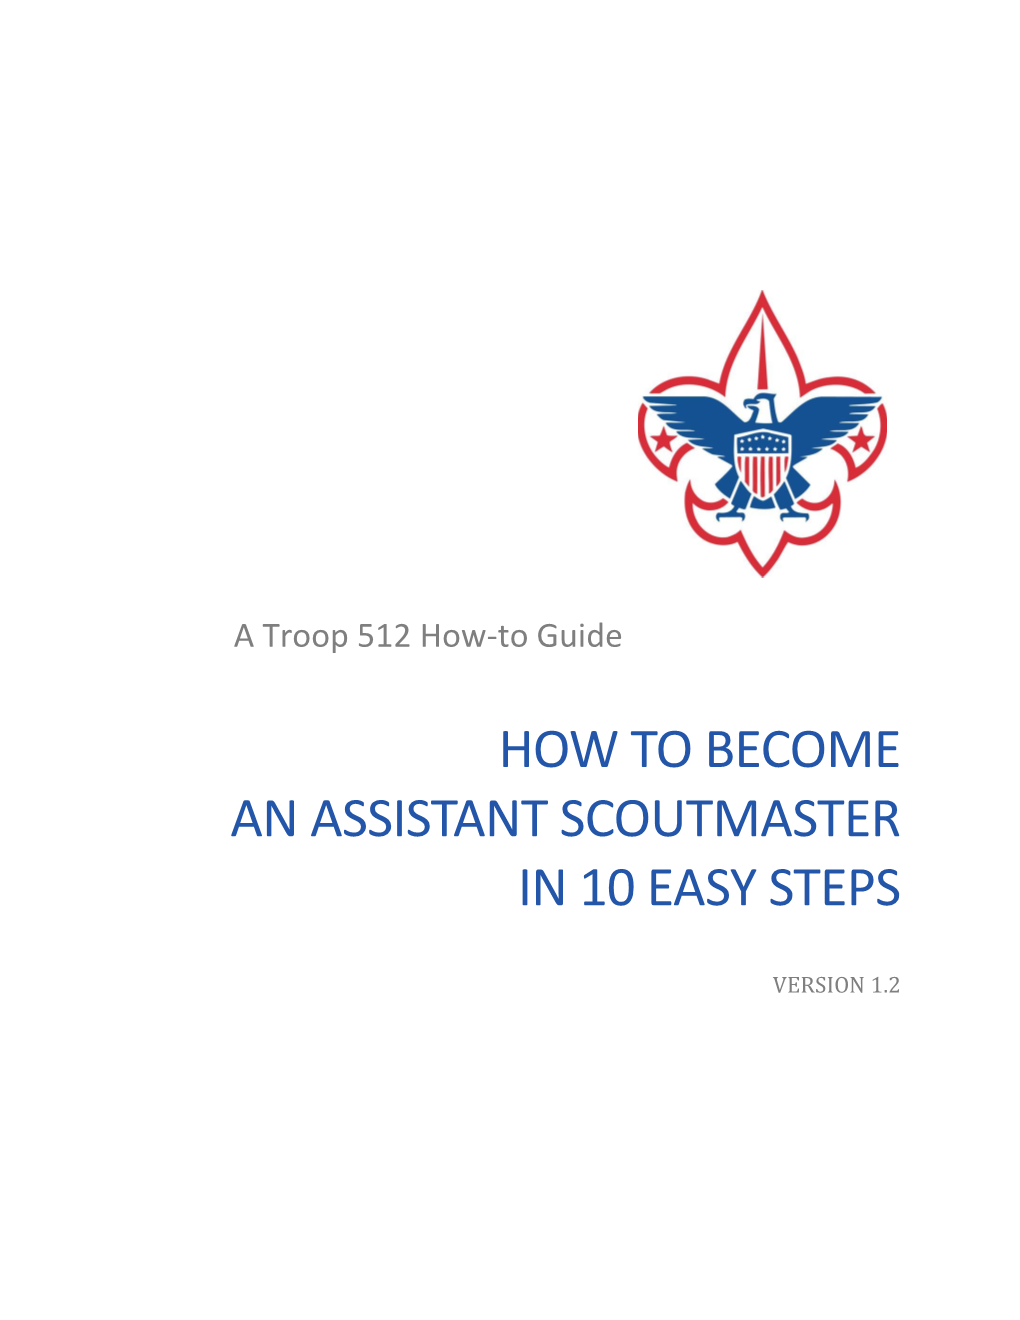 How to Become an Assistant Scoutmaster in 10 Easy Steps